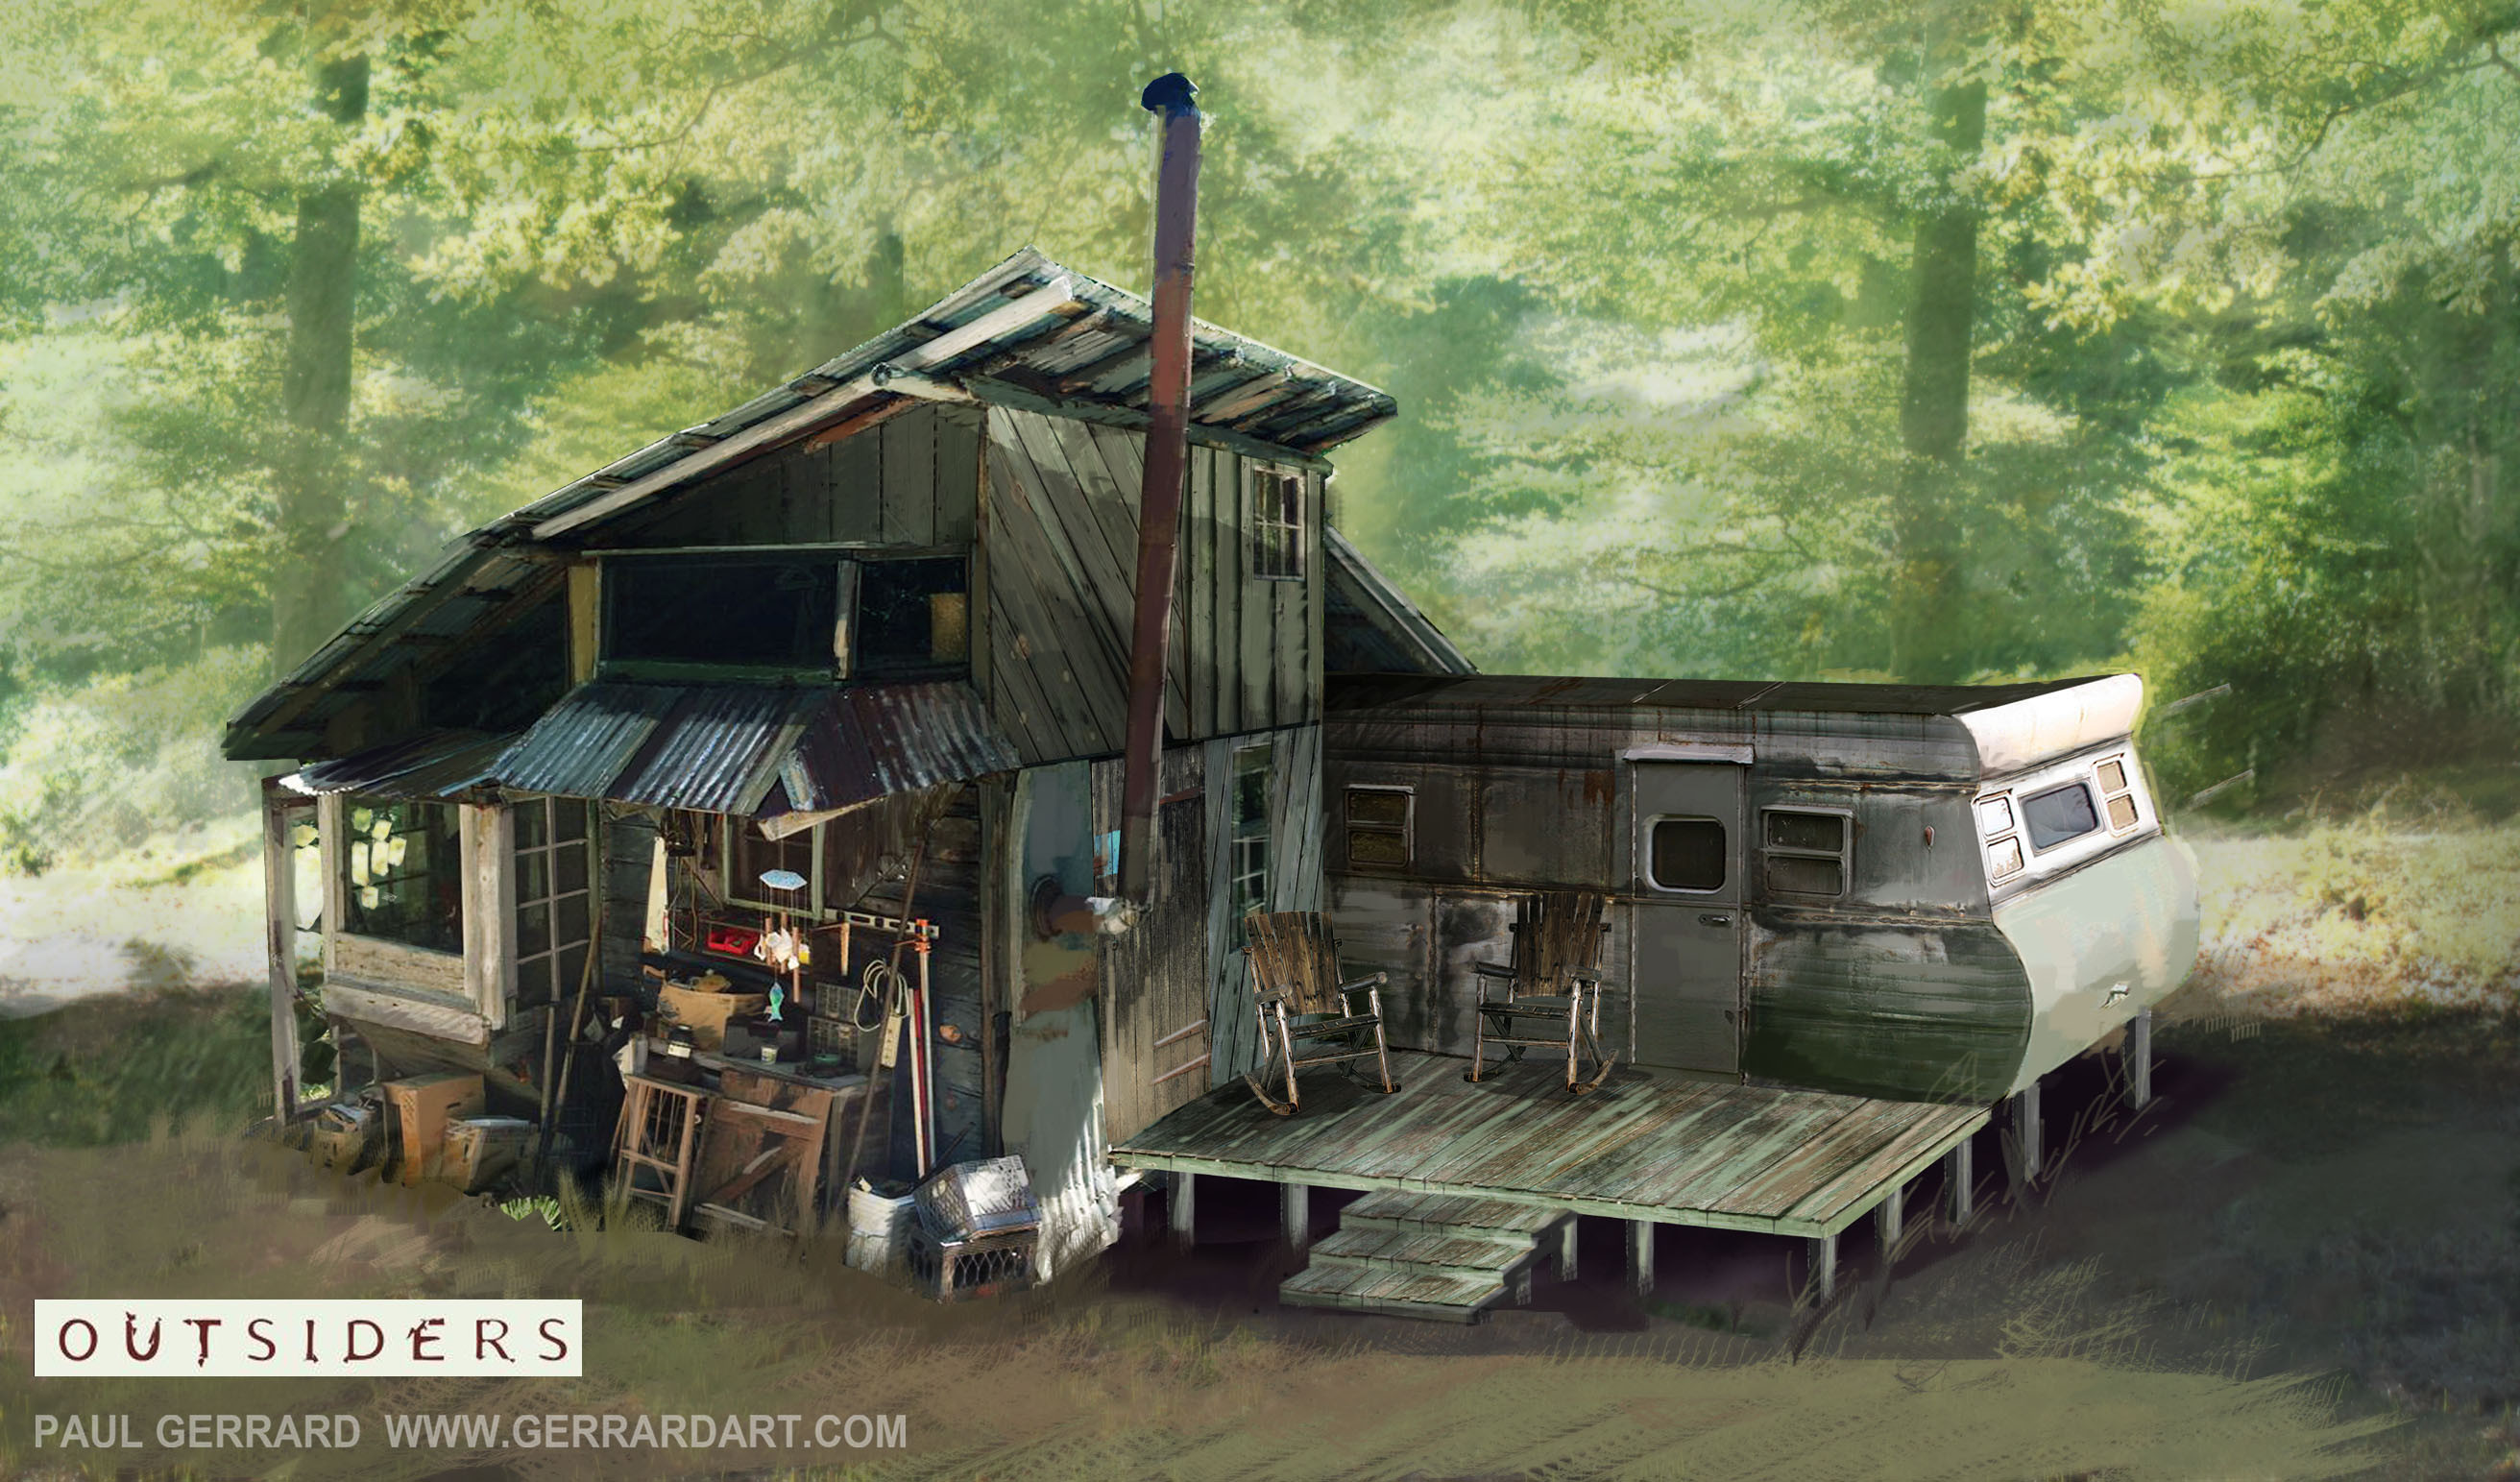 OUTSIDERS : TV SHOW

Concept art from the show